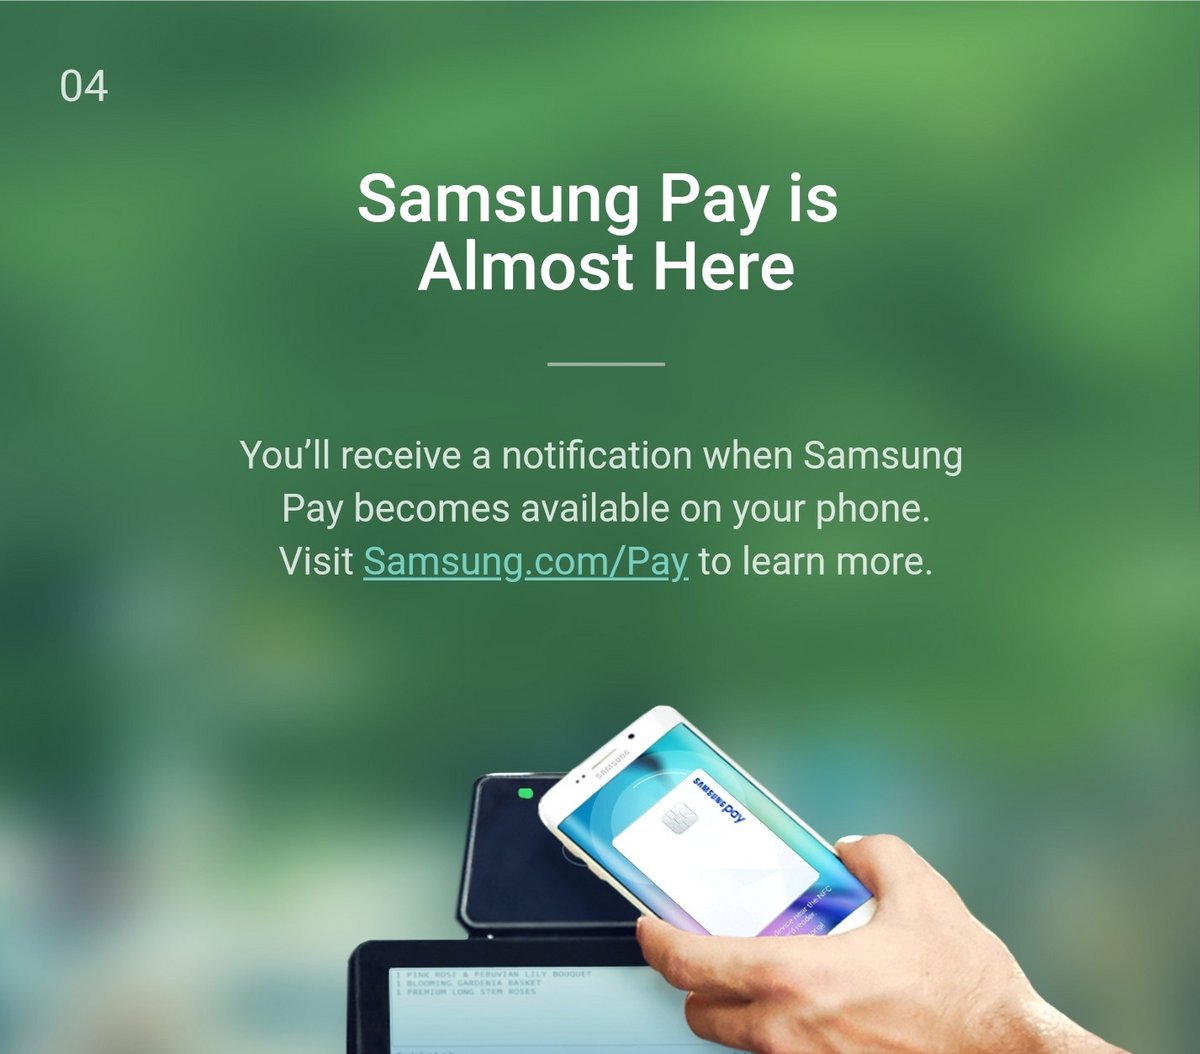 Samsung Pay landing page